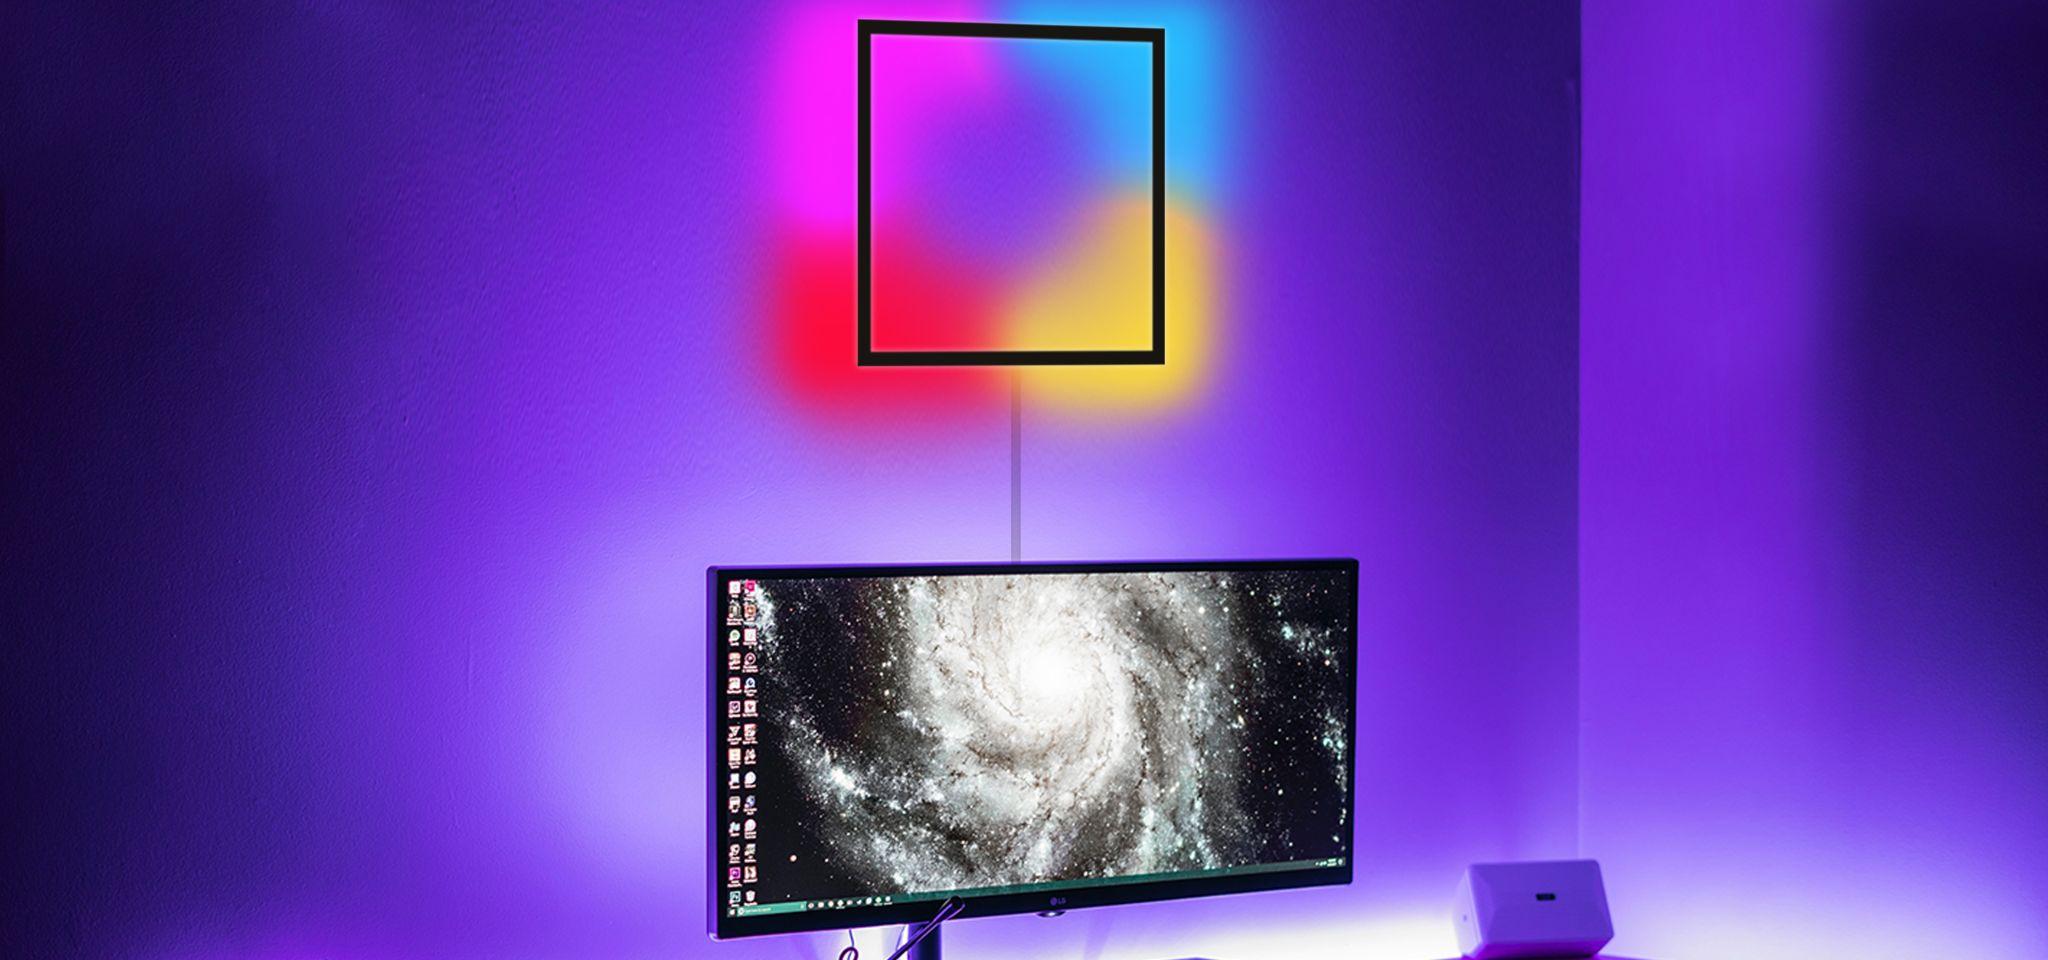 cube RGB wall lamp in the wall